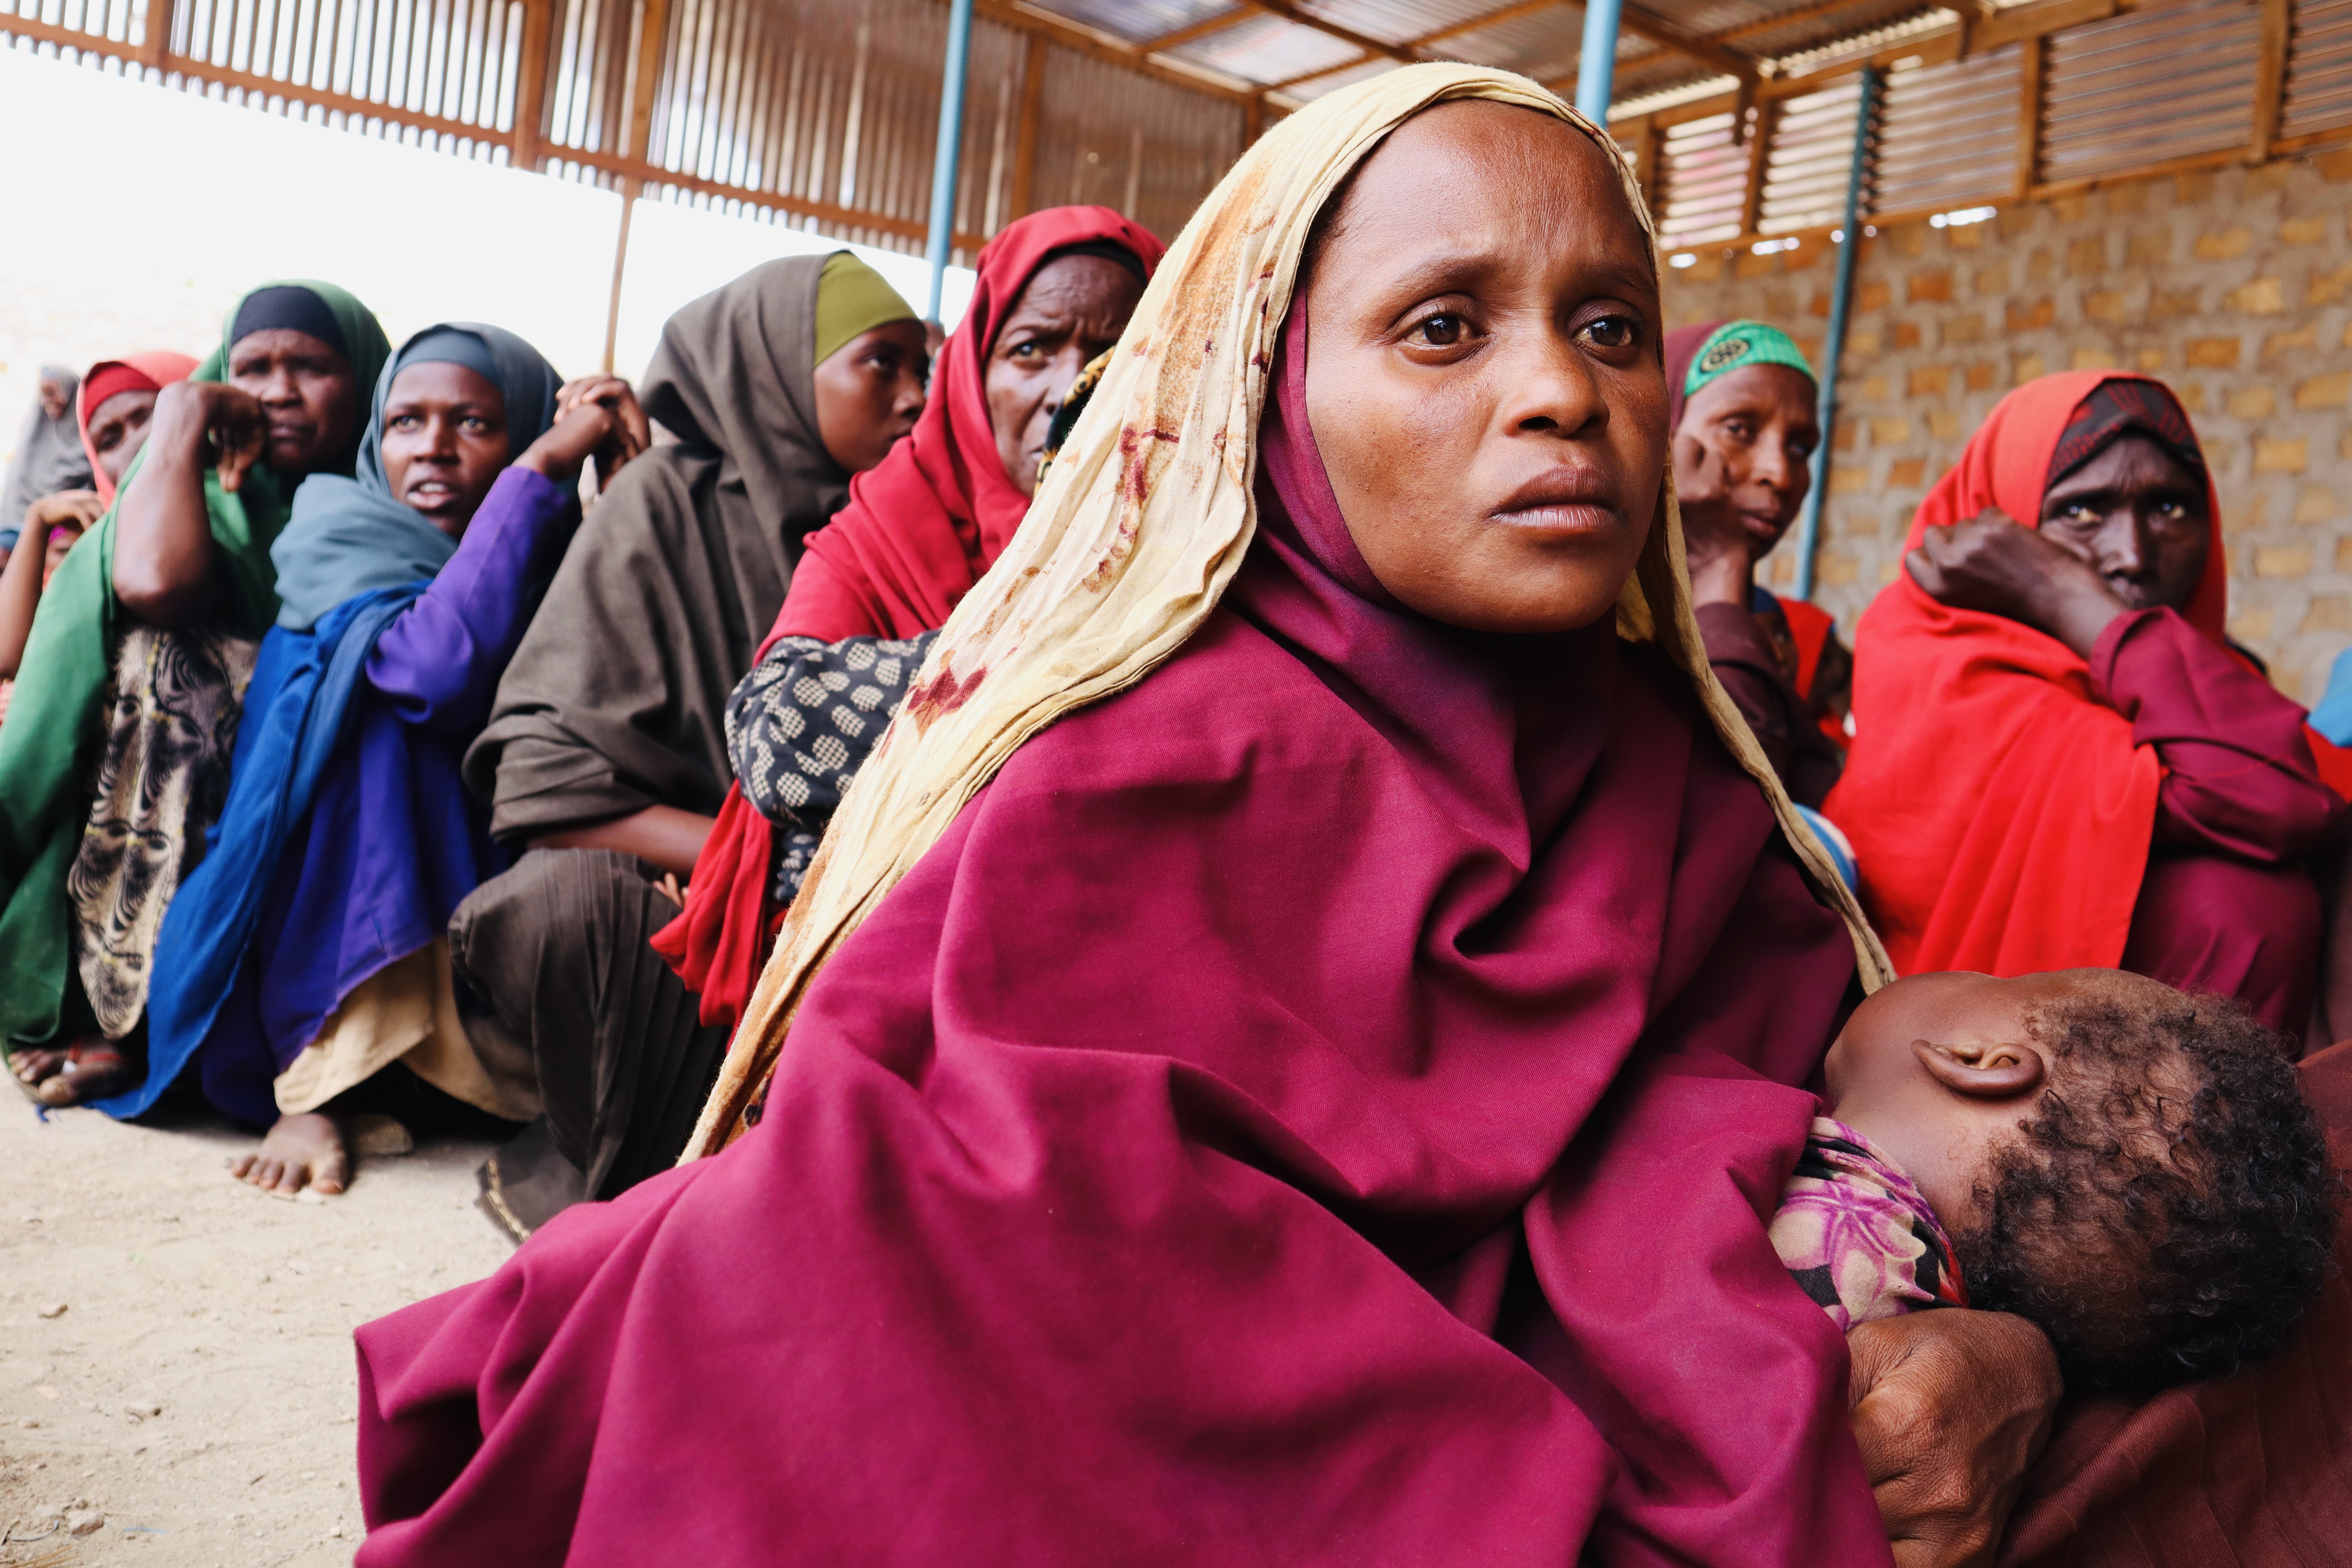 Adey came to #Baidoa in a site for internally displaced persons in the hope of getting assistance to survive the #drought that’s killed livelihoods across #Somalia. She’s registered to receive US$75 in food vouchers until December 2022, through funding from the World Food Programme